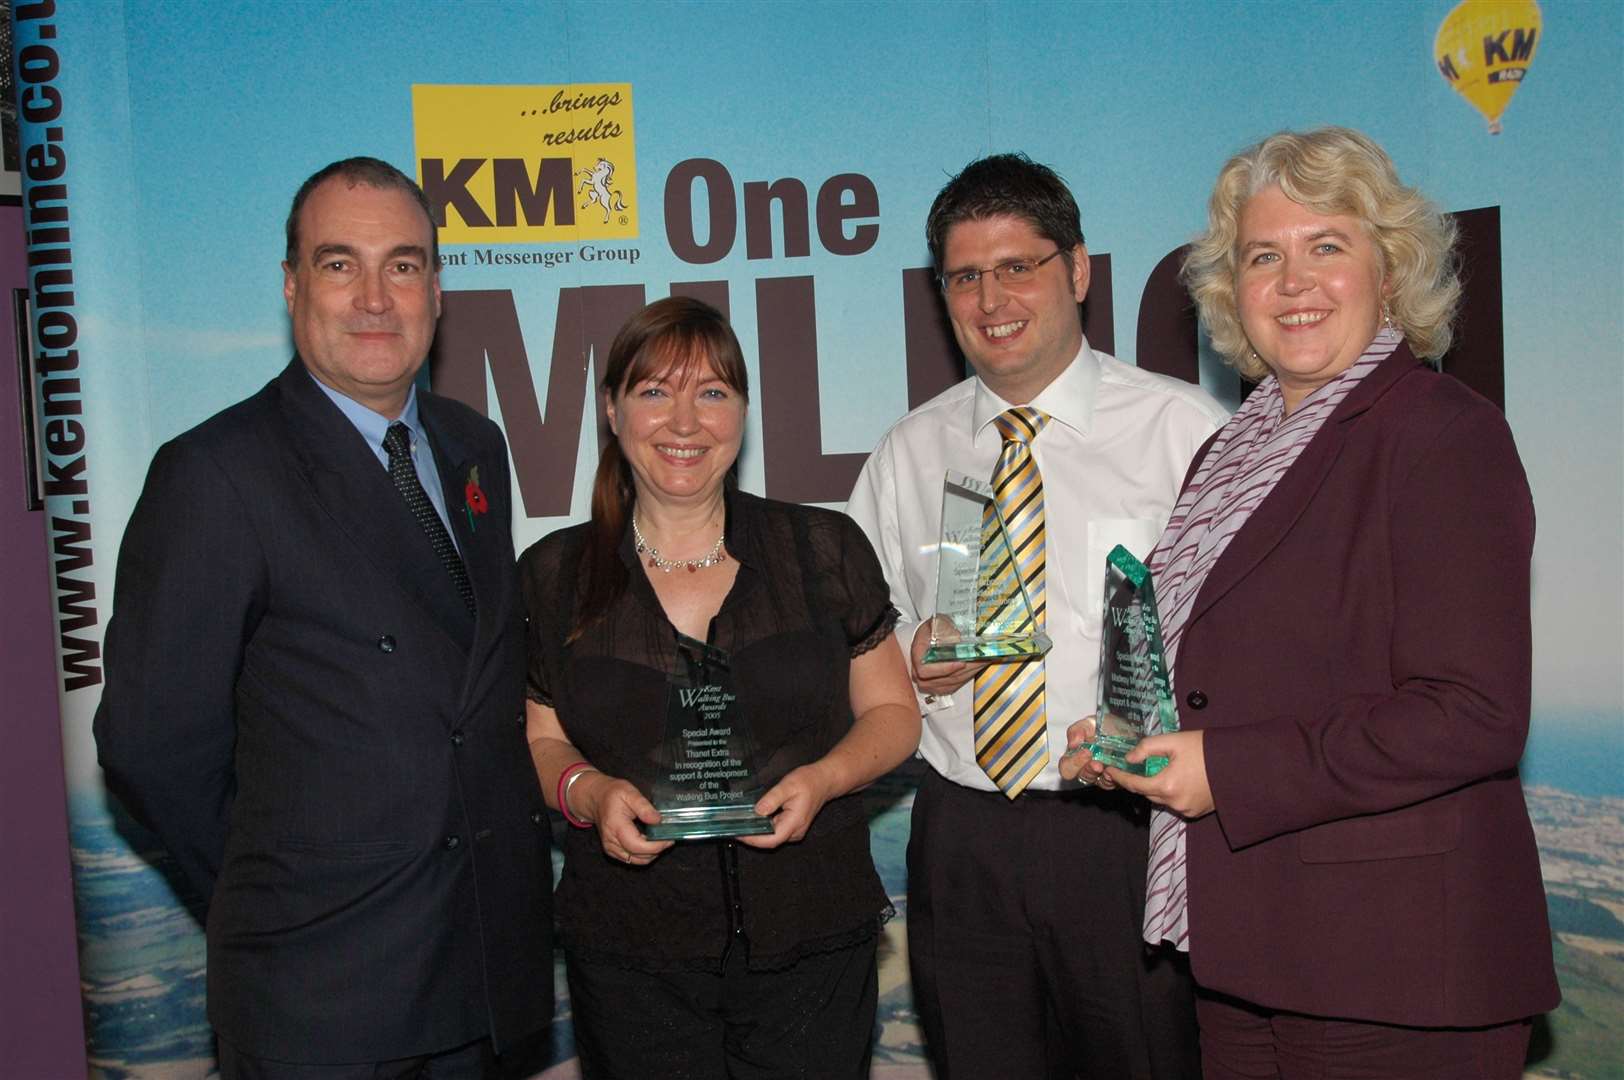 Kent Walking Bus Awards at Gillingham Football Club in 2005 with, from the left, Transport Minister Stephen Ladyman, community editor of the Thanet Extra Carol Davies, senior editor of the Kentish Express Leo Whitlock and senior news editor of the Medway Messenger Sarah Clarke